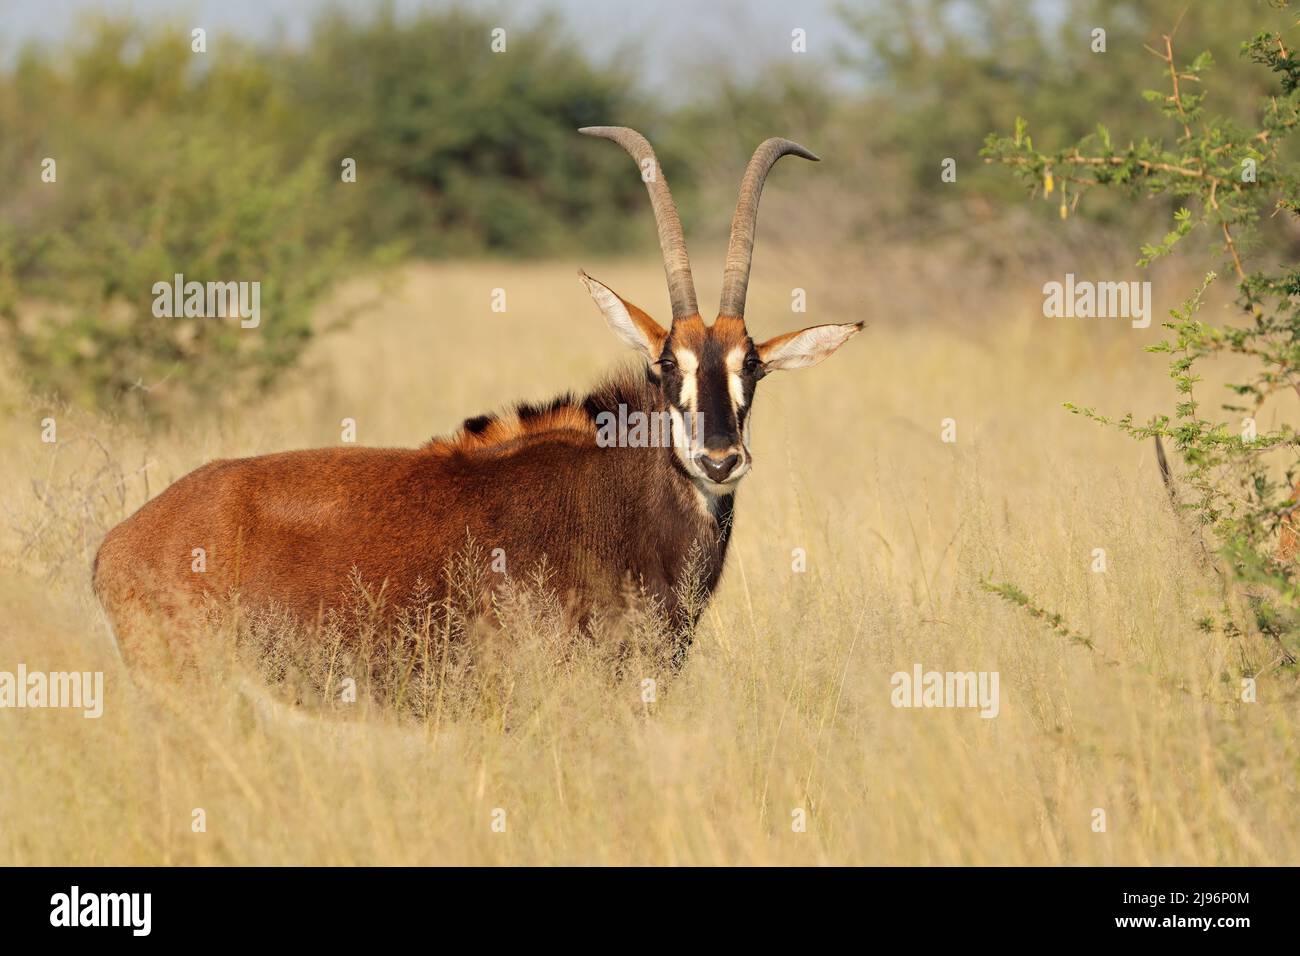 A sable antelope (Hippotragus niger) in natural habitat, South Africa Stock Photo